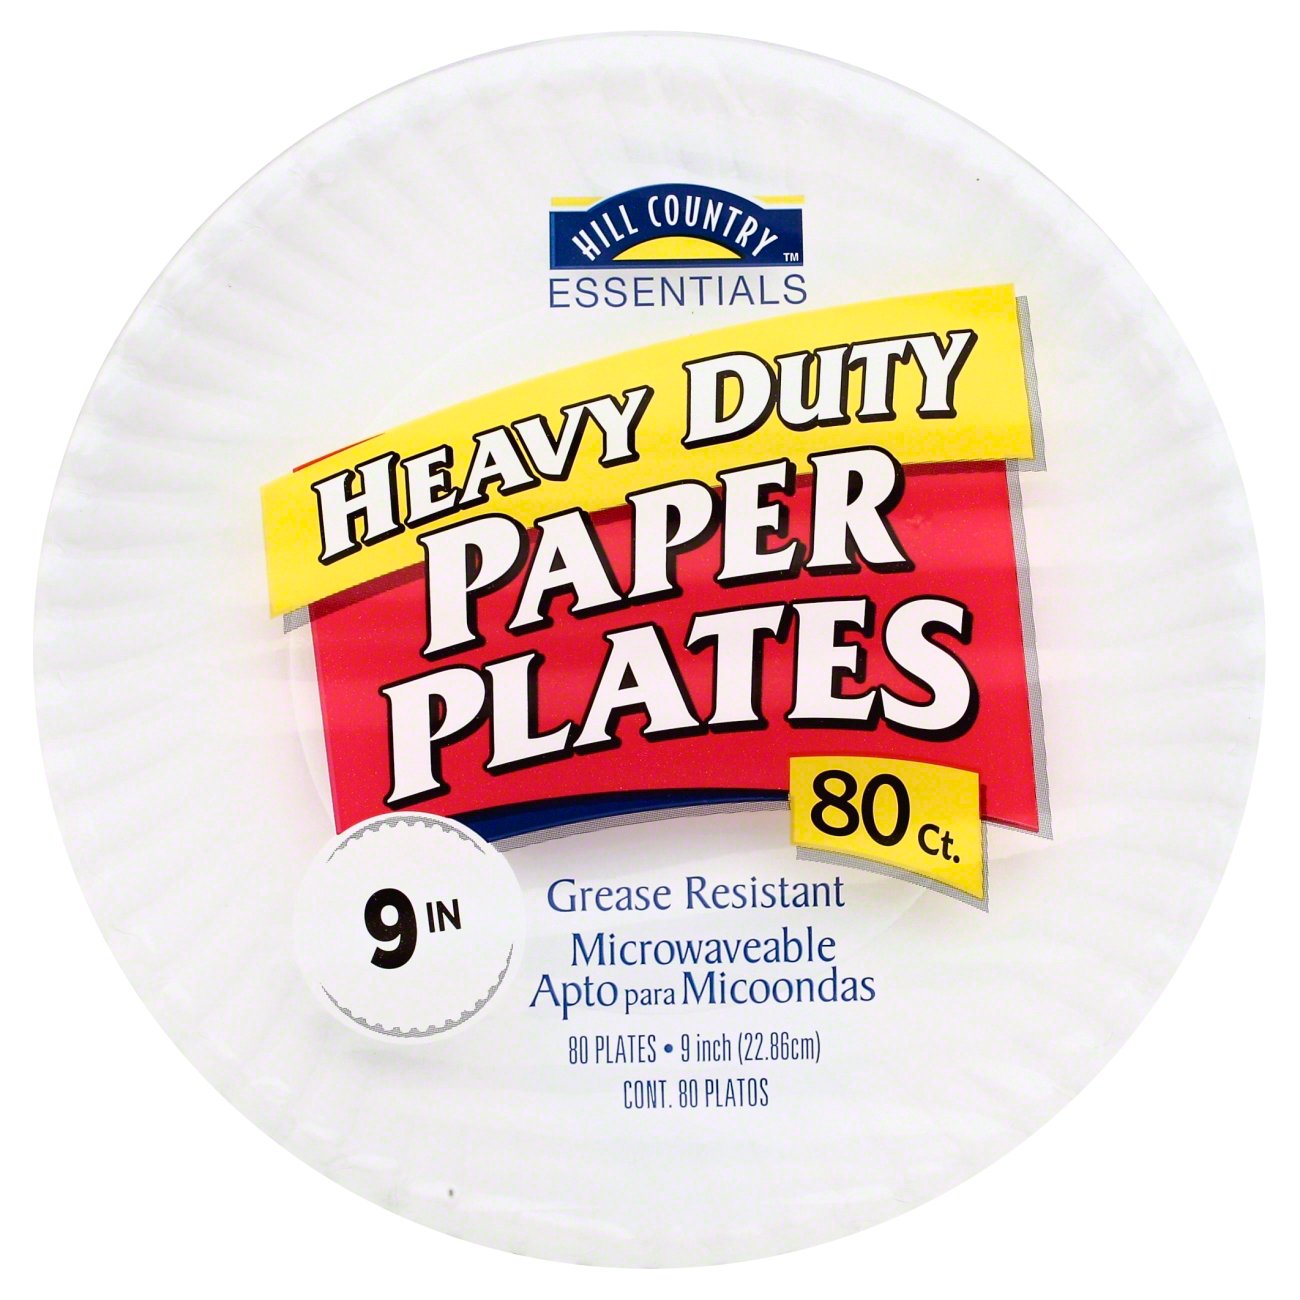 Hill Country Essentials 9 in Heavy Duty Paper Plates - Shop Plates & Bowls  at H-E-B